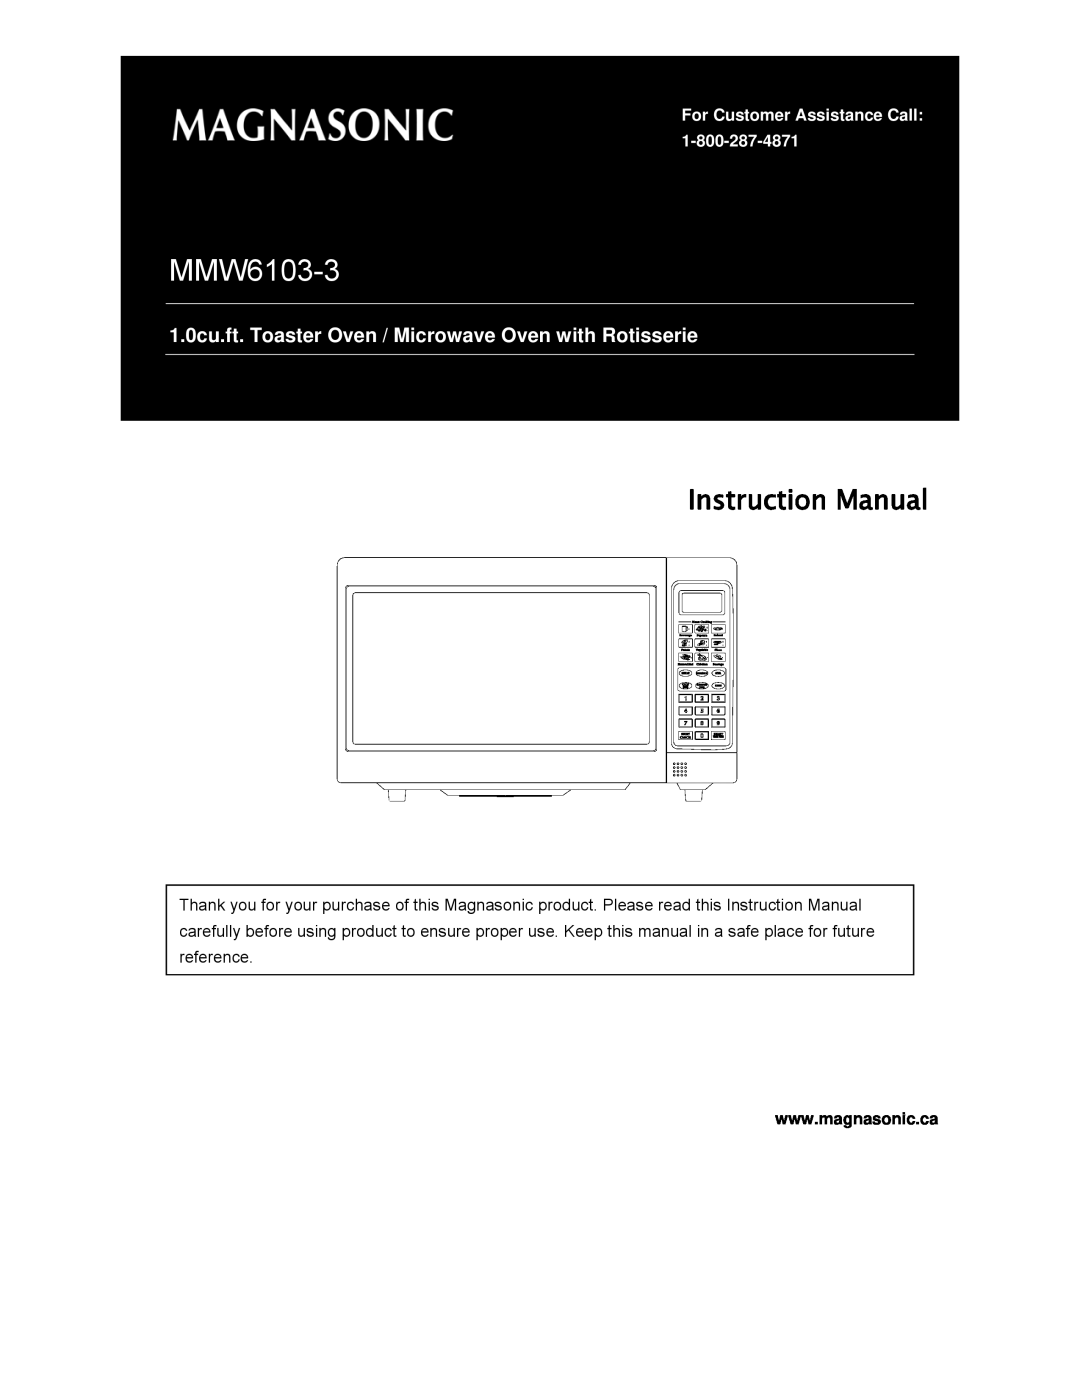 Magnasonic MMW6103-3 instruction manual 1.0cu.ft. Toaster Oven / Microwave Oven with Rotisserie 